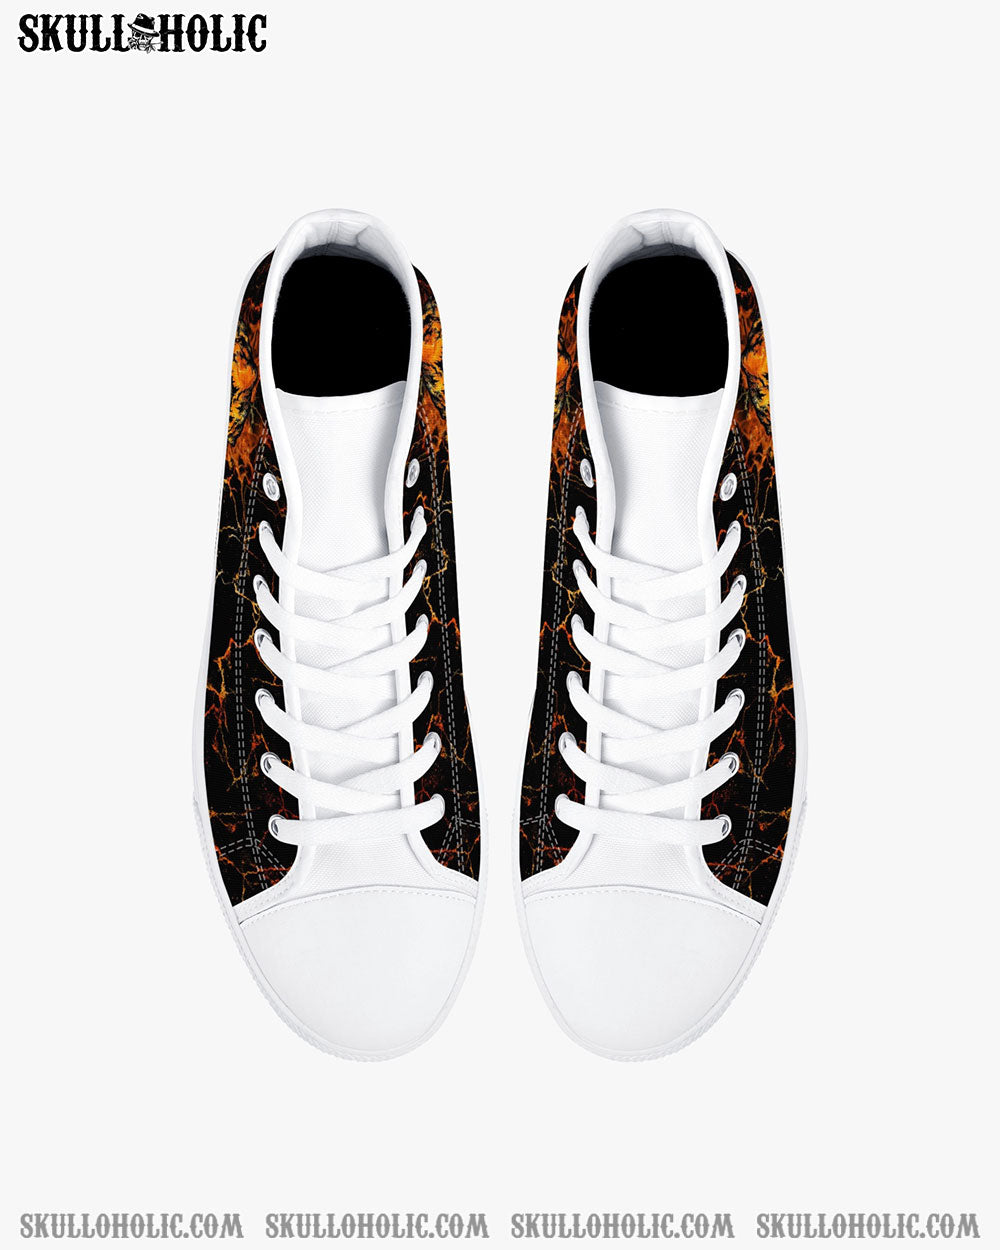 REAPER SKULL FIRE HIGH TOP CANVAS SHOES - YHTG1708222